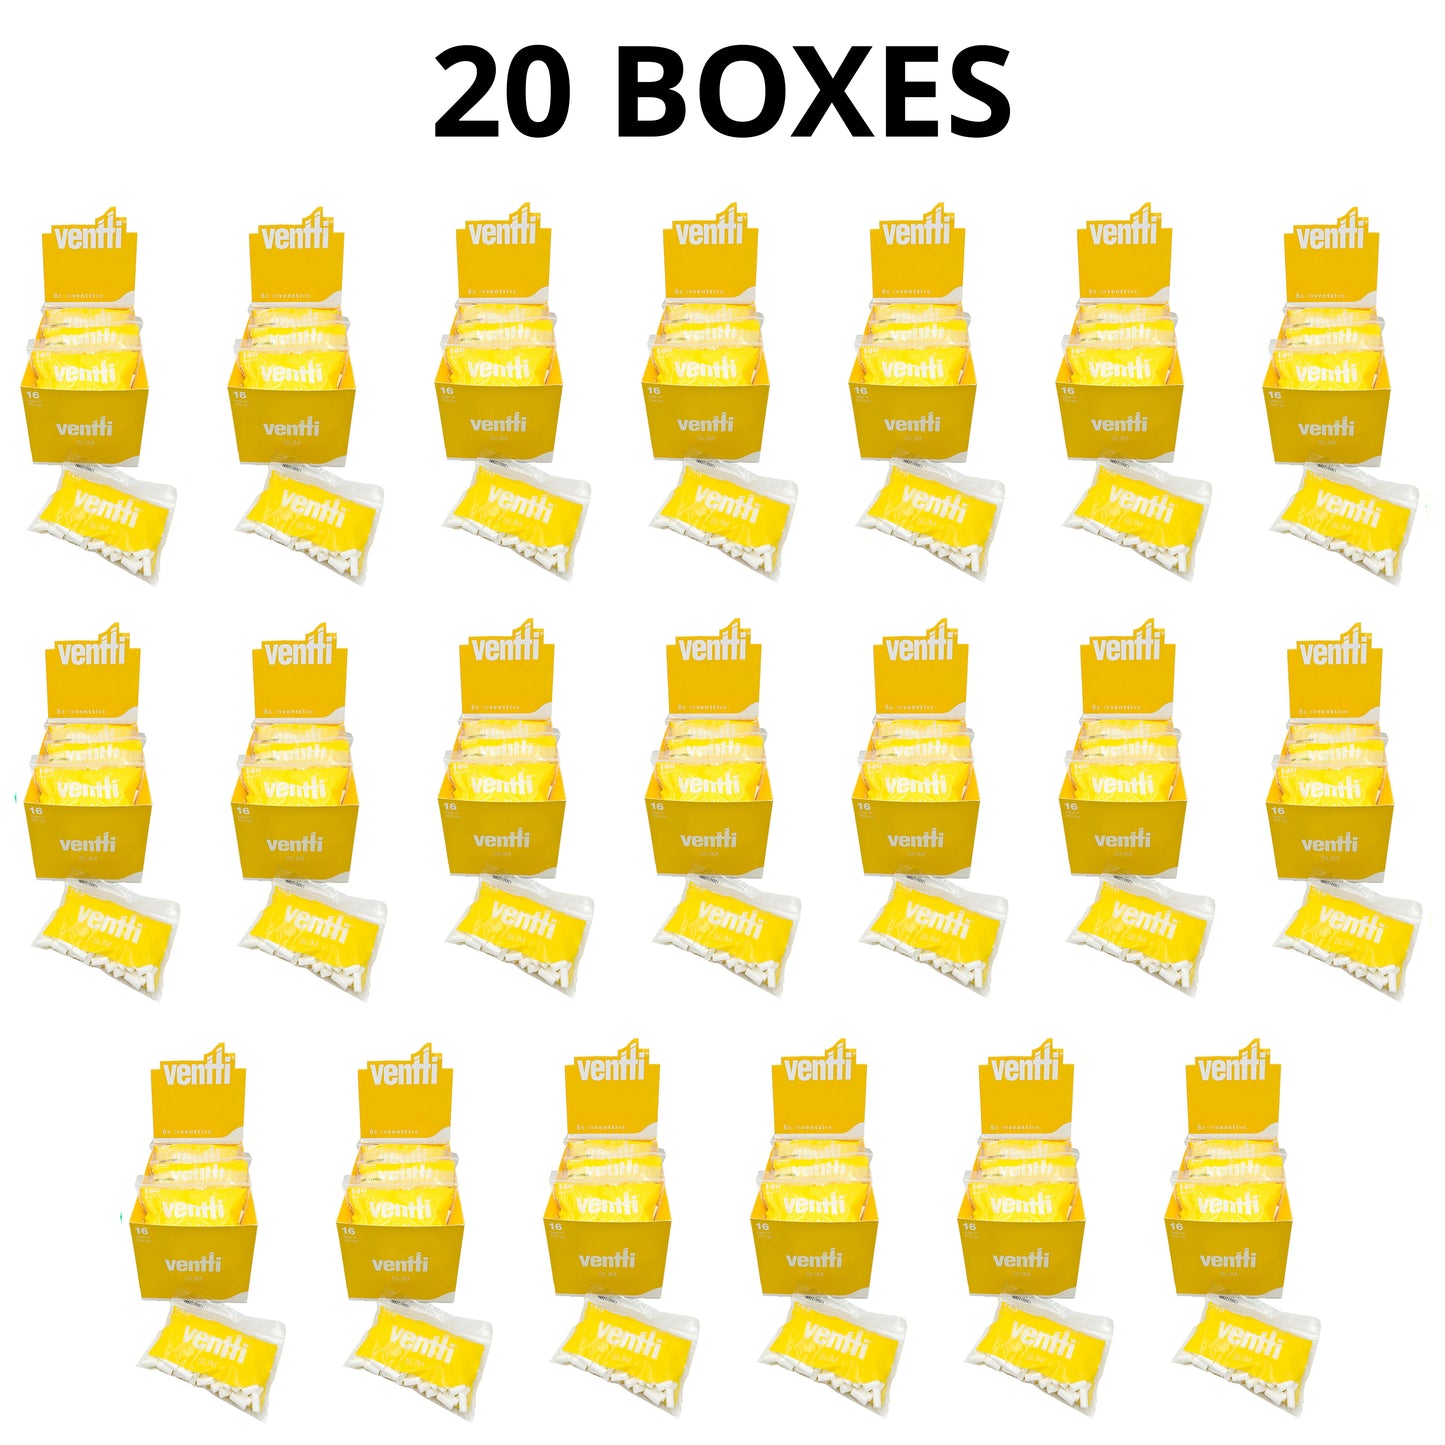 Ventti Filters Slim Yellow (Box of 12) - 20 Boxes